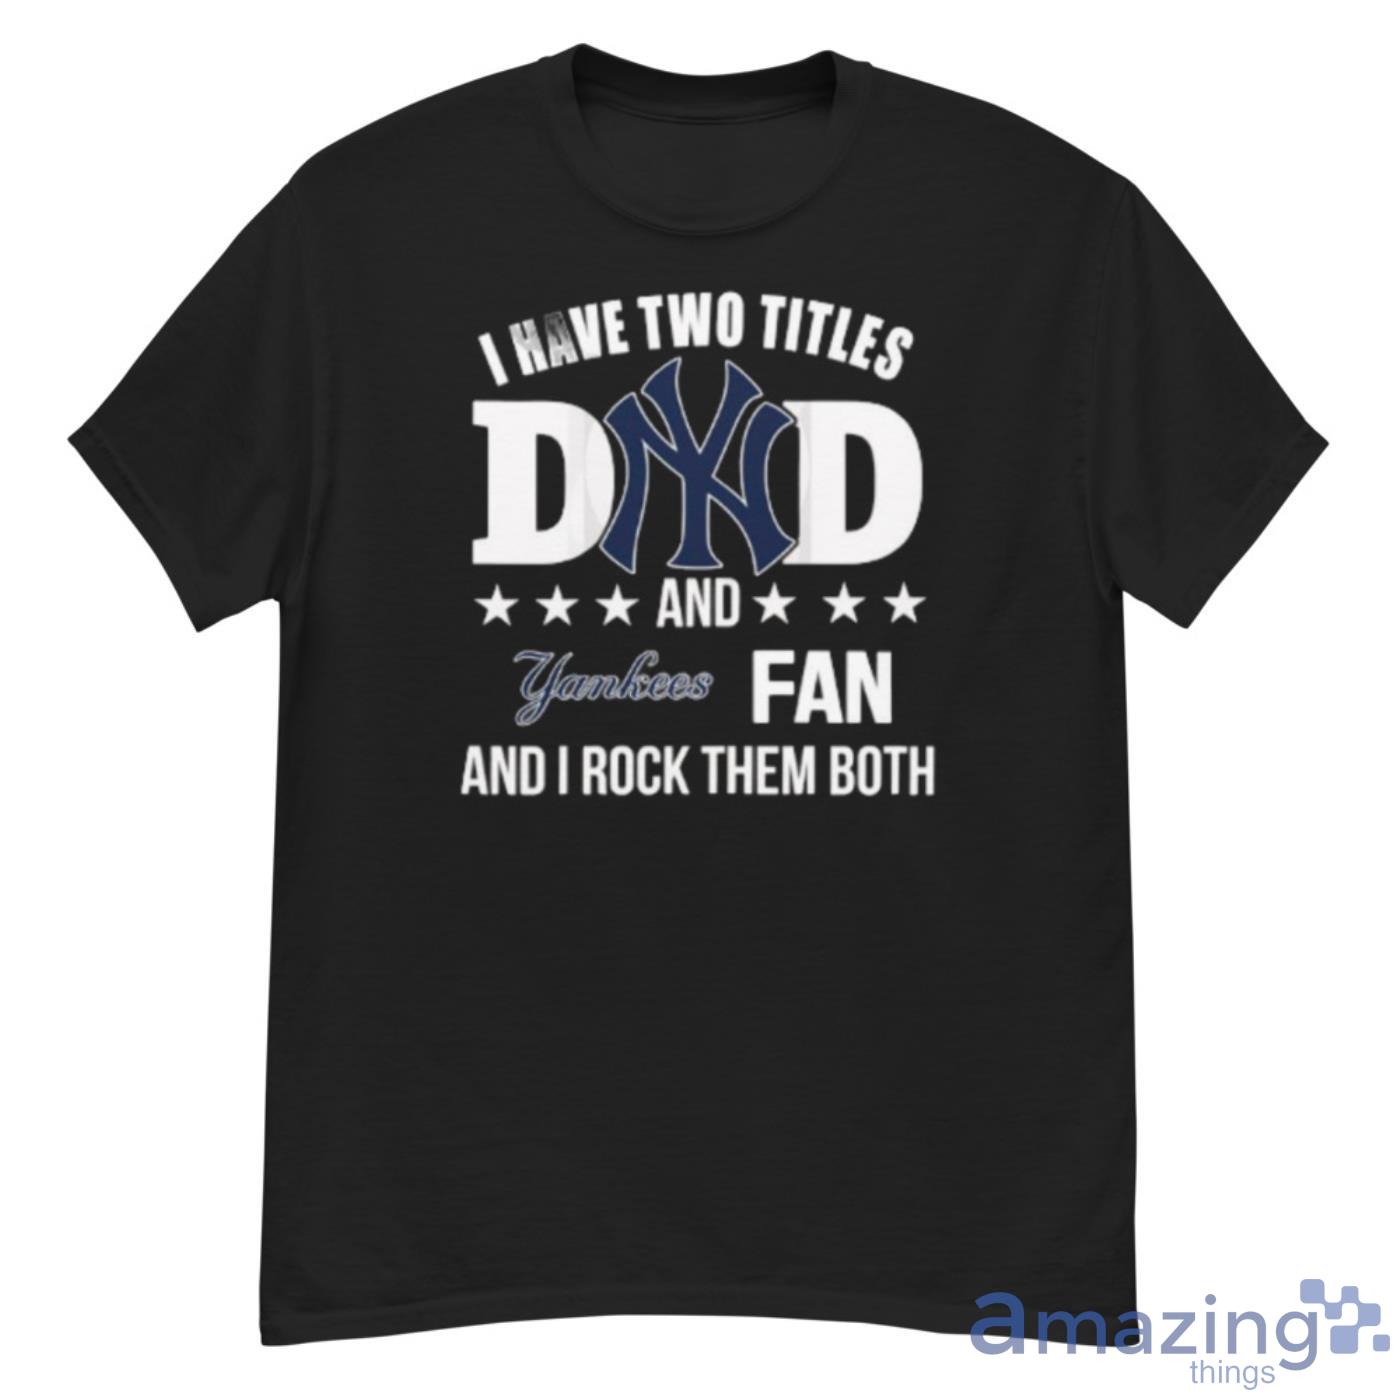 New York Yankees Fan Dad I Have Two Titles And I Rock Them Both MLB Shirt